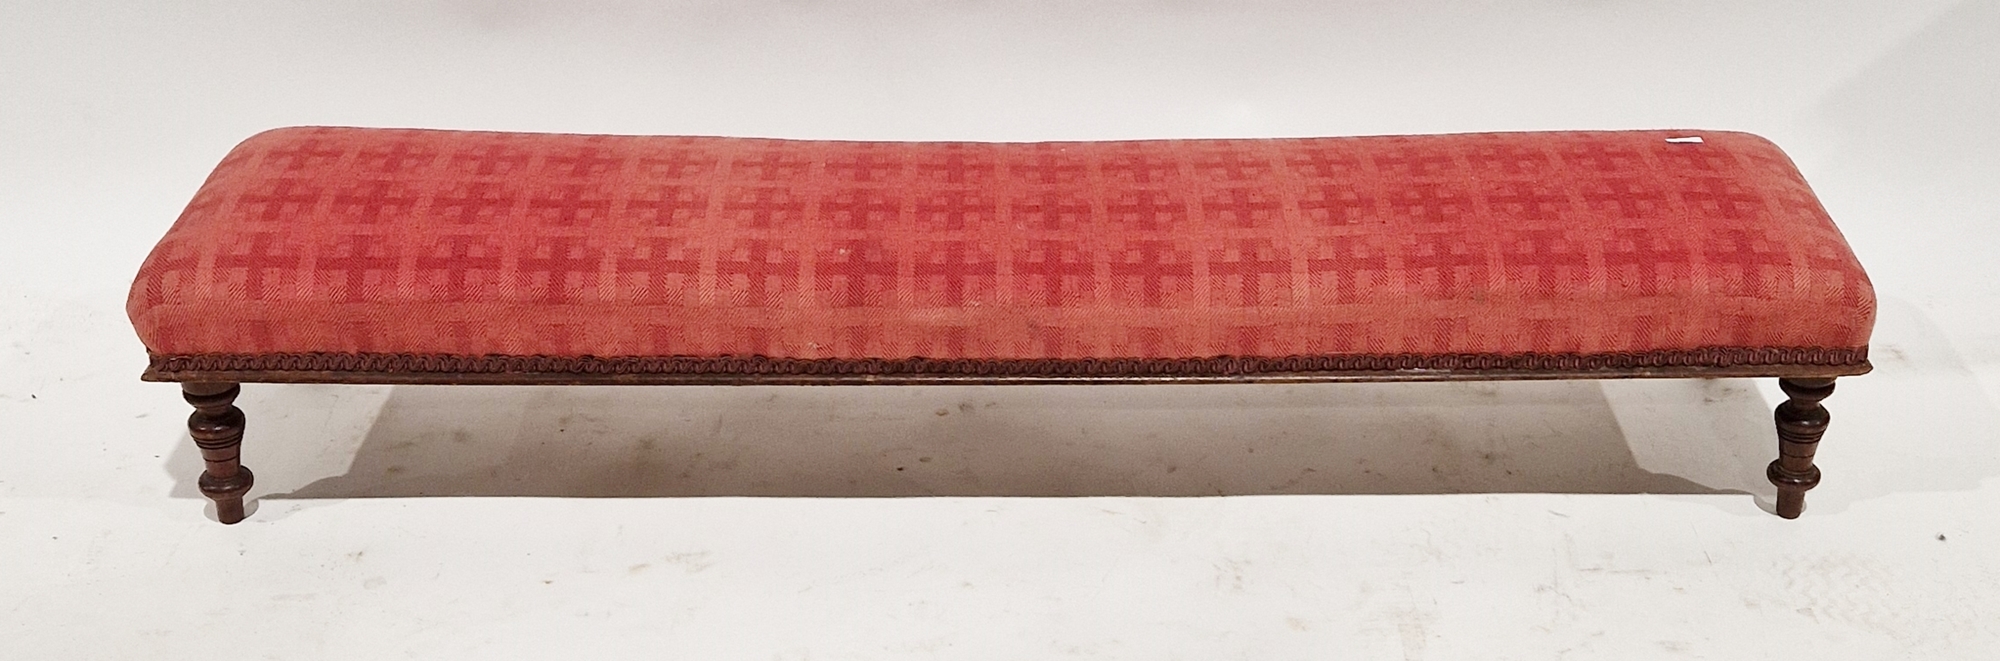 Late 19th/early 20th century footstool of oblong form, with crewel work upholstery, on four cabriole - Image 3 of 3